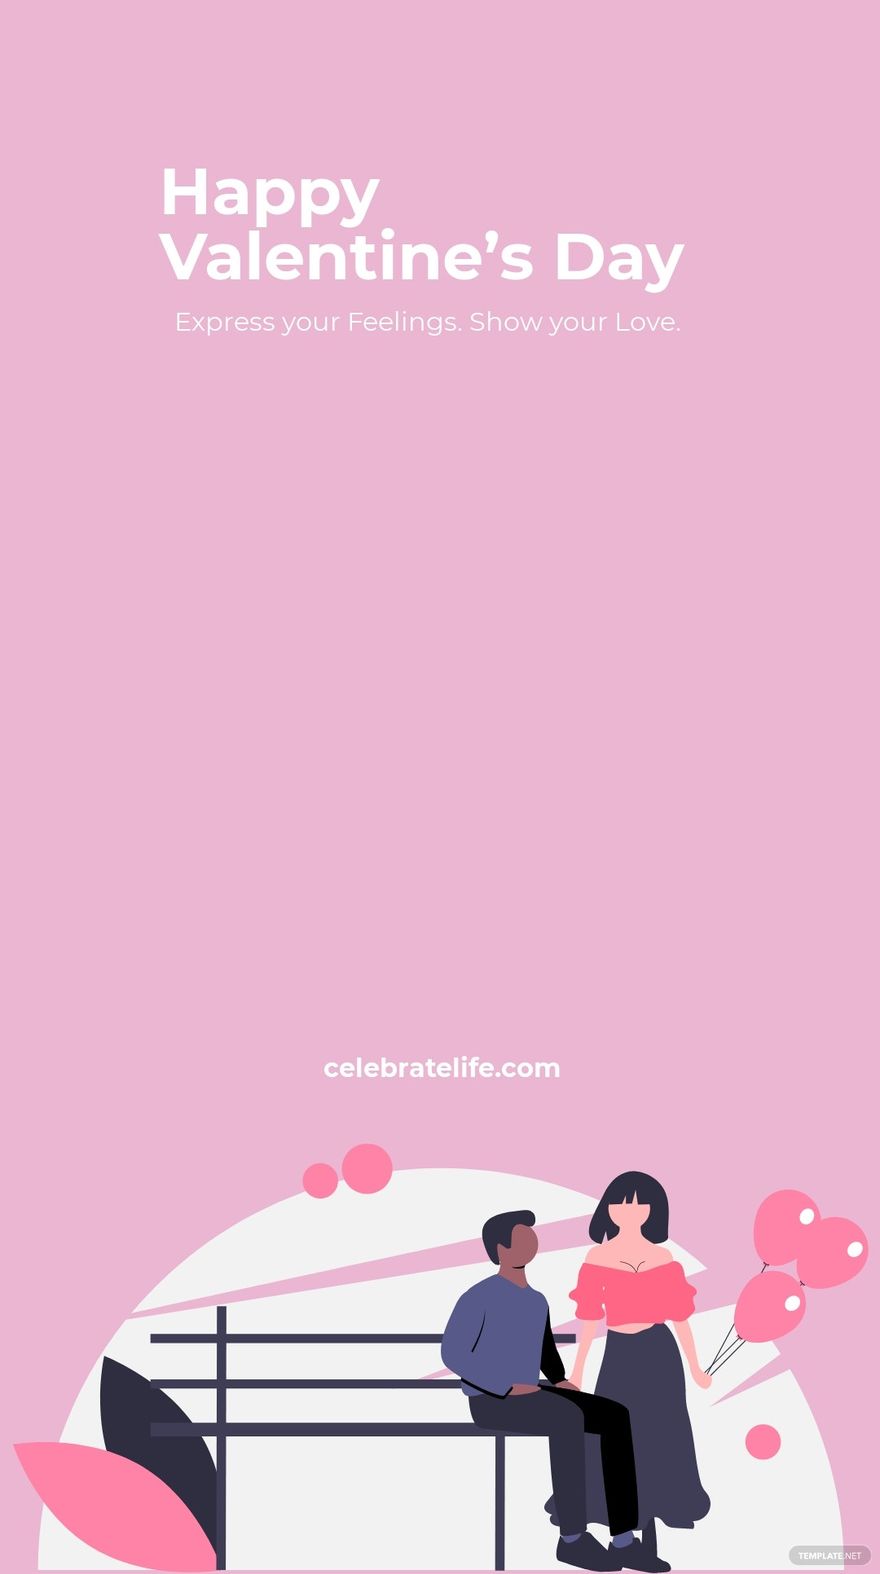 Free Happy Valentine's Day Snapchat Geofilter Template